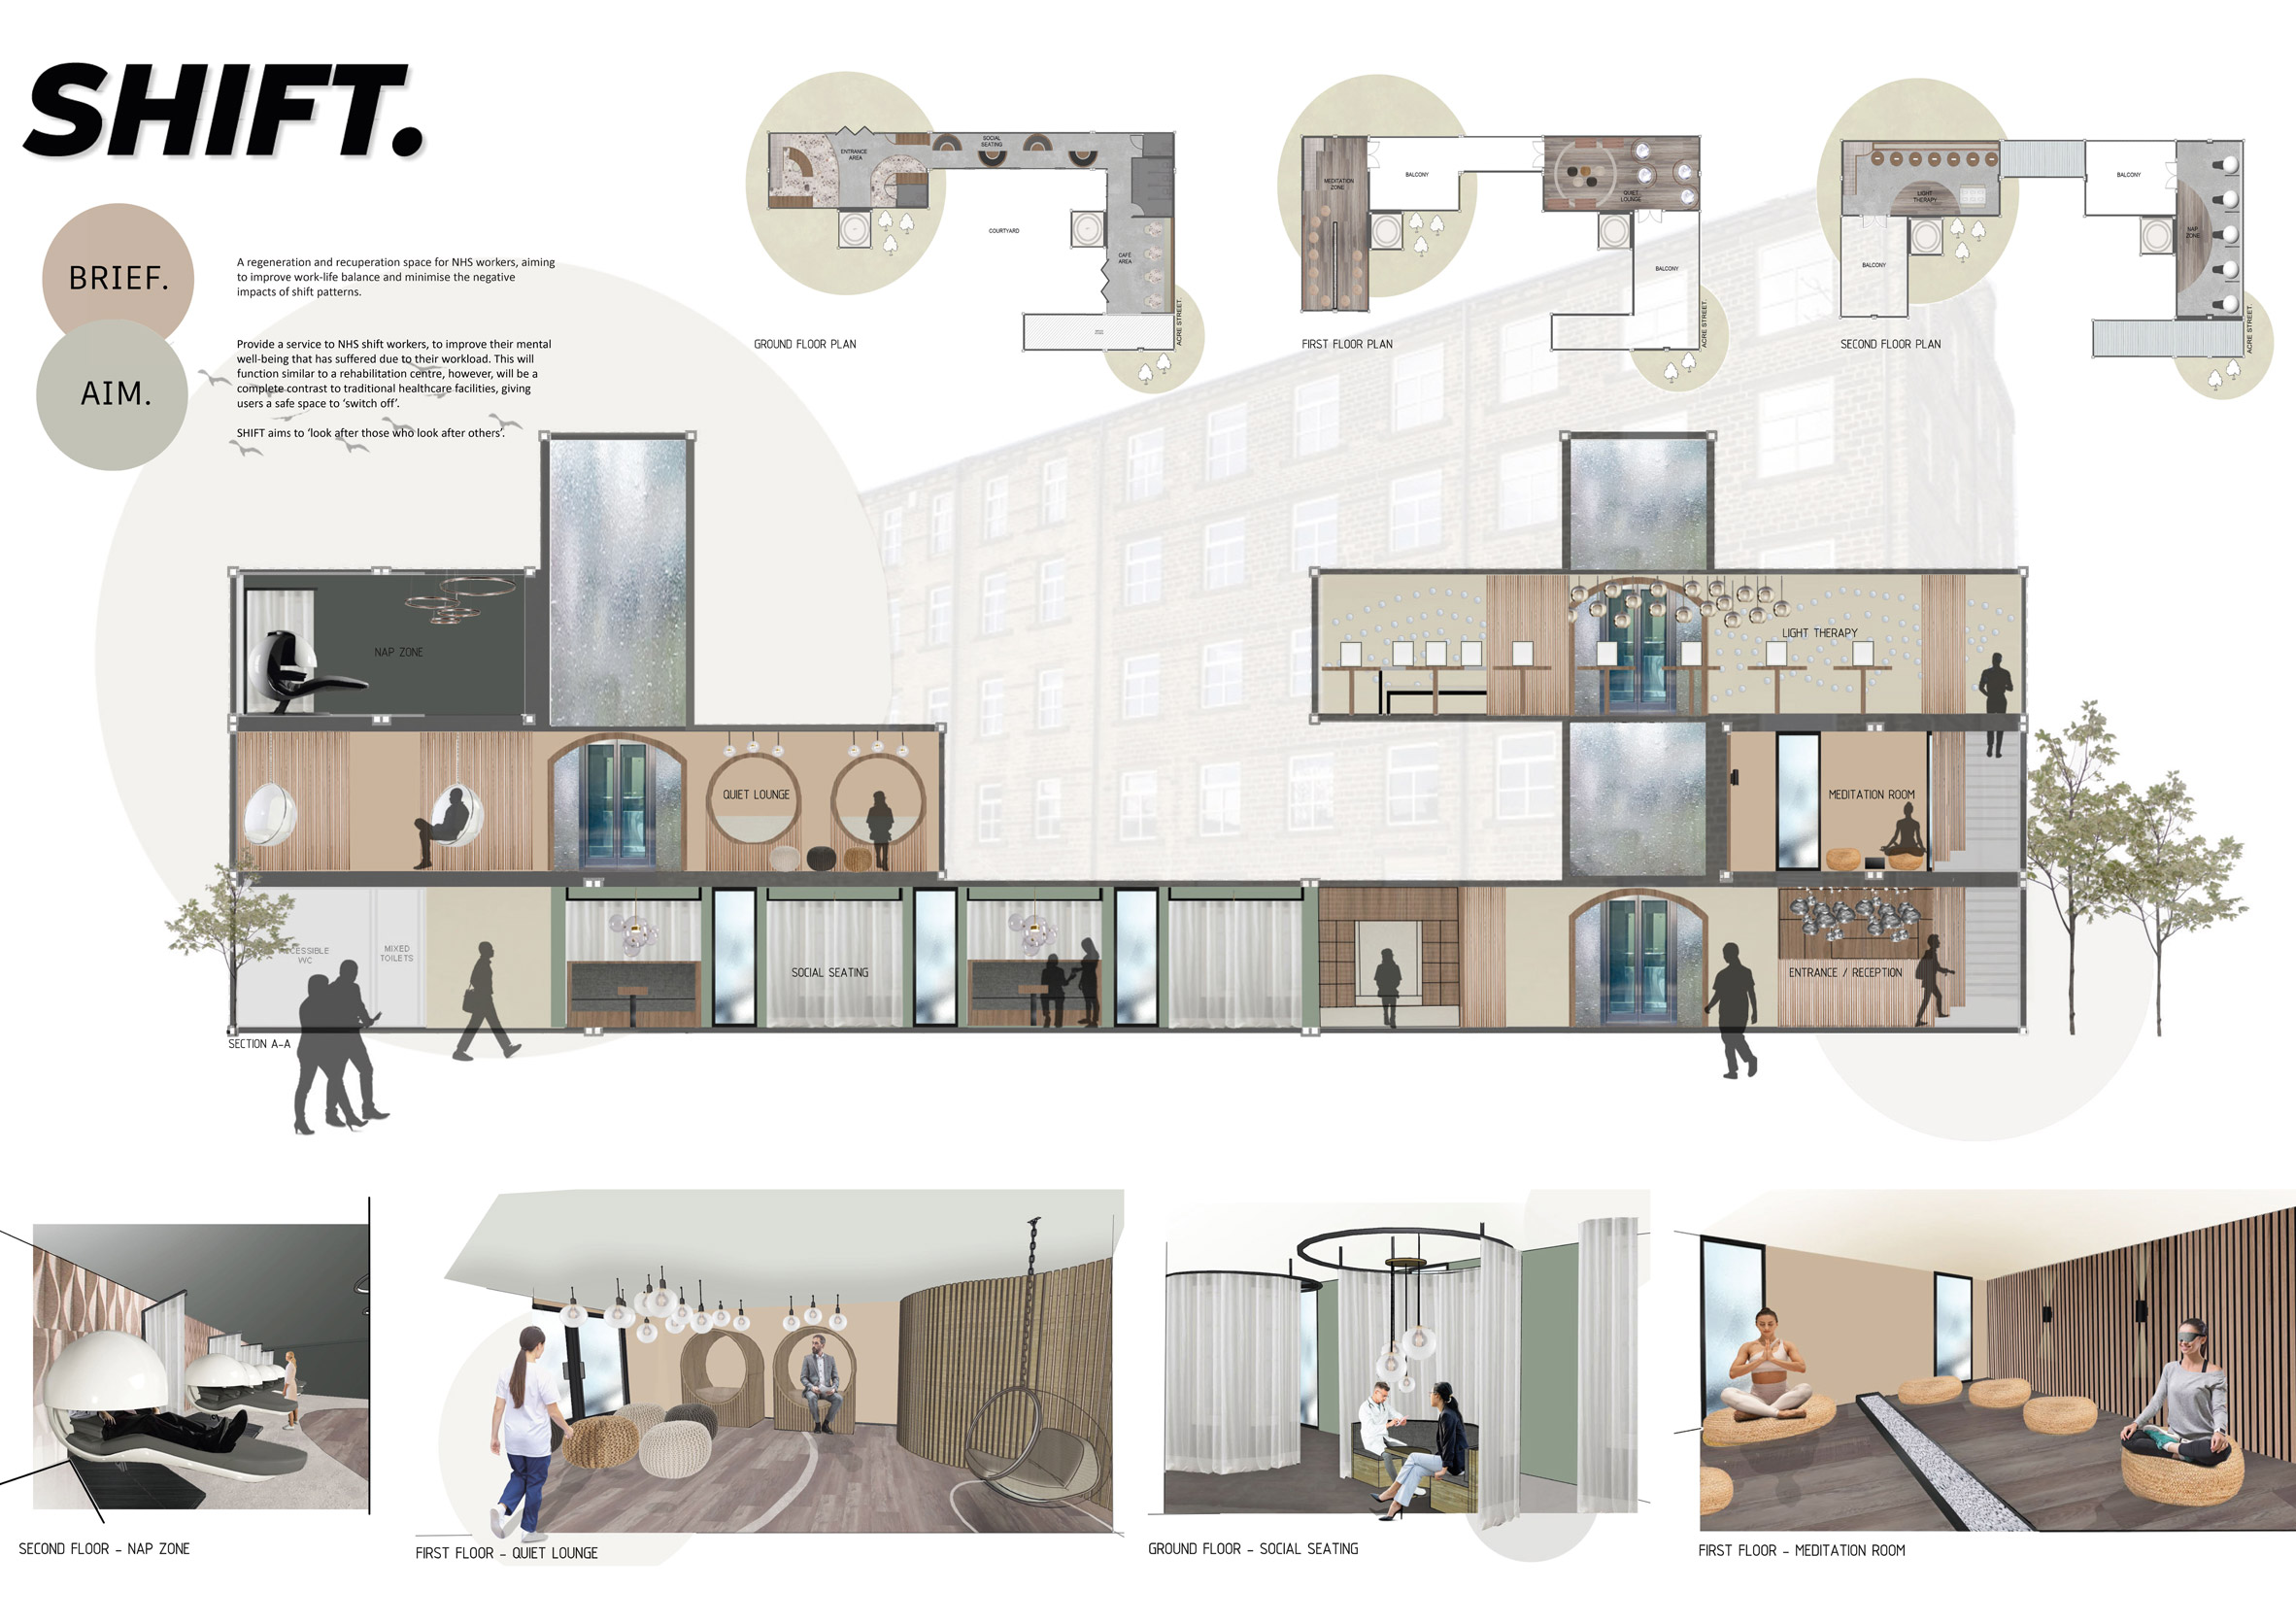 Rendered section and interior perspectives by student at The University of Huddersfield